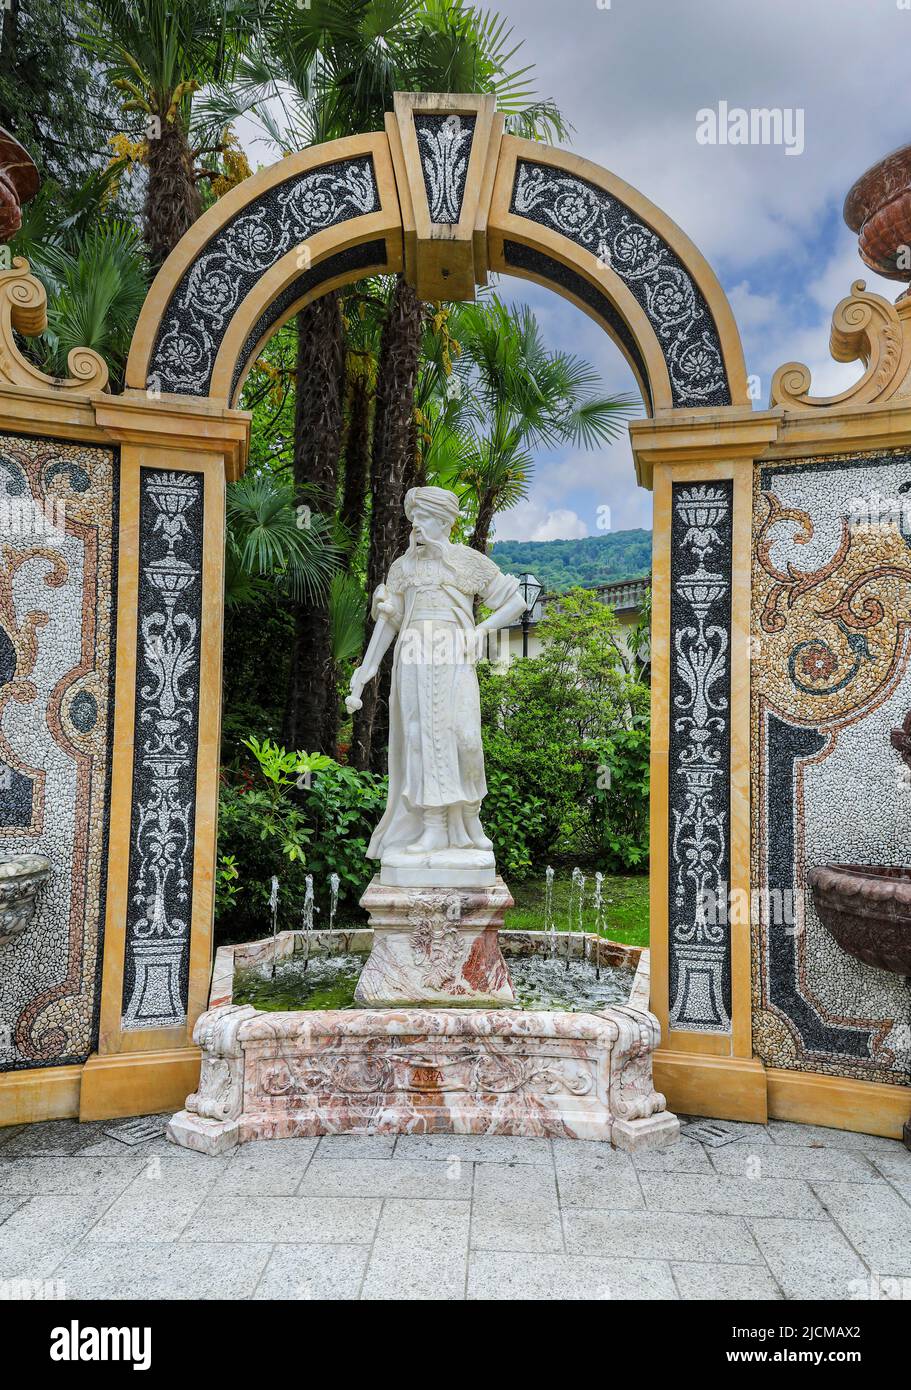 Statues or sculptures in the gardens of the Grand Hotel des Iles Borromees, Stresa, Lake Maggiore, Italy Stock Photo